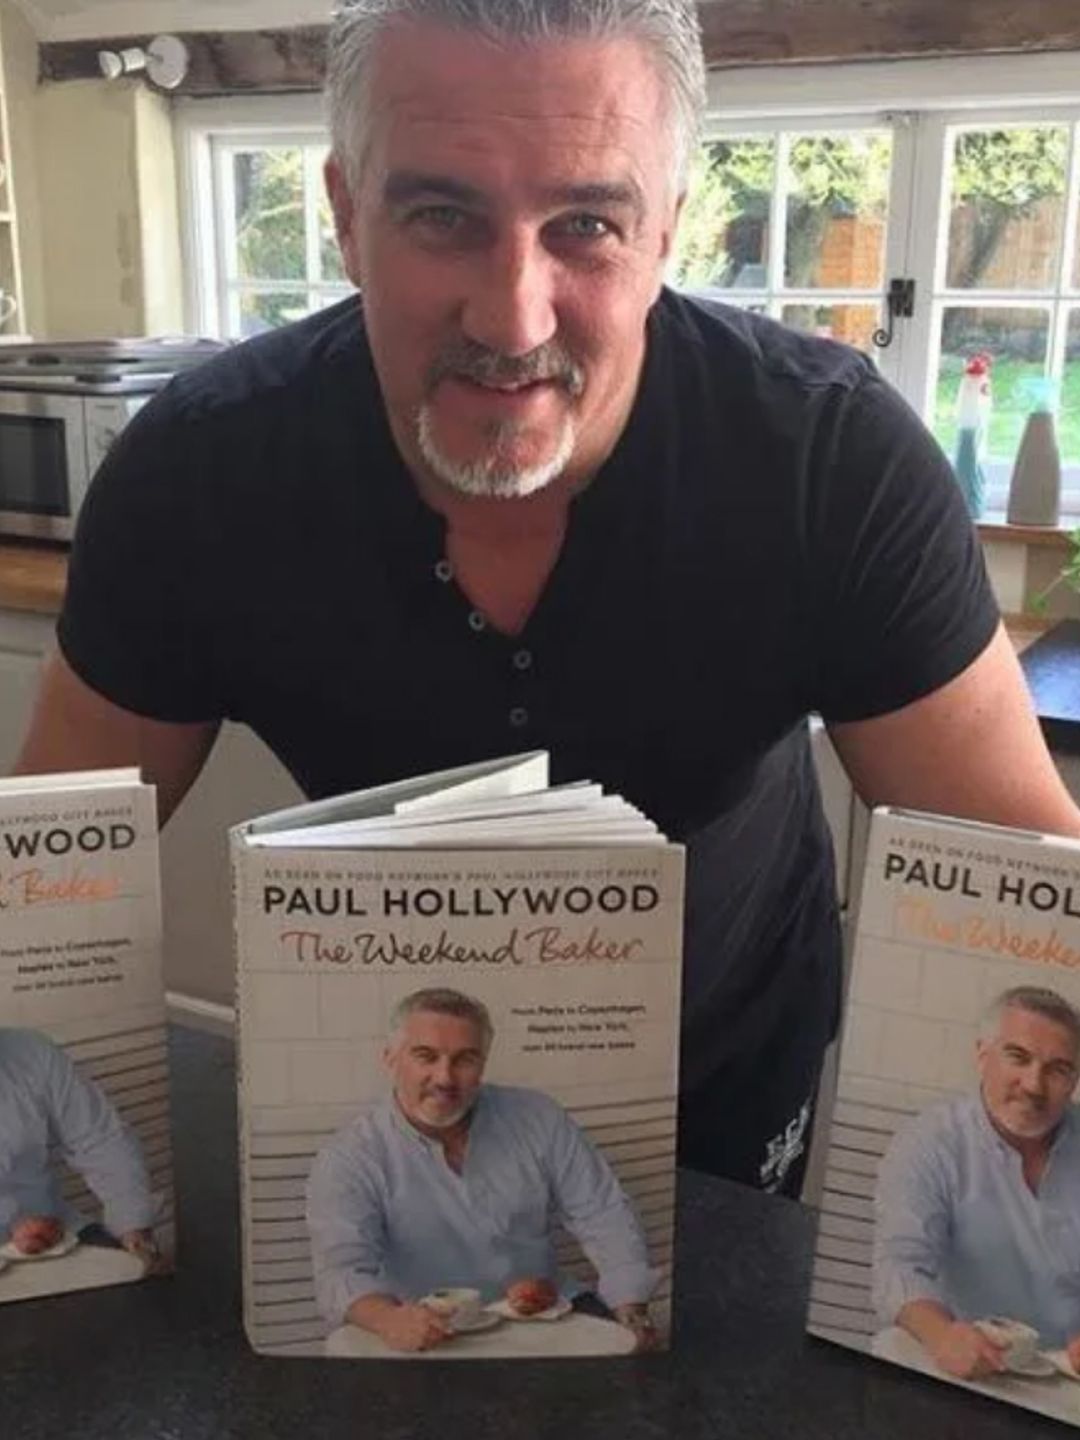 Paul Hollywood in a kitchen in front of three books